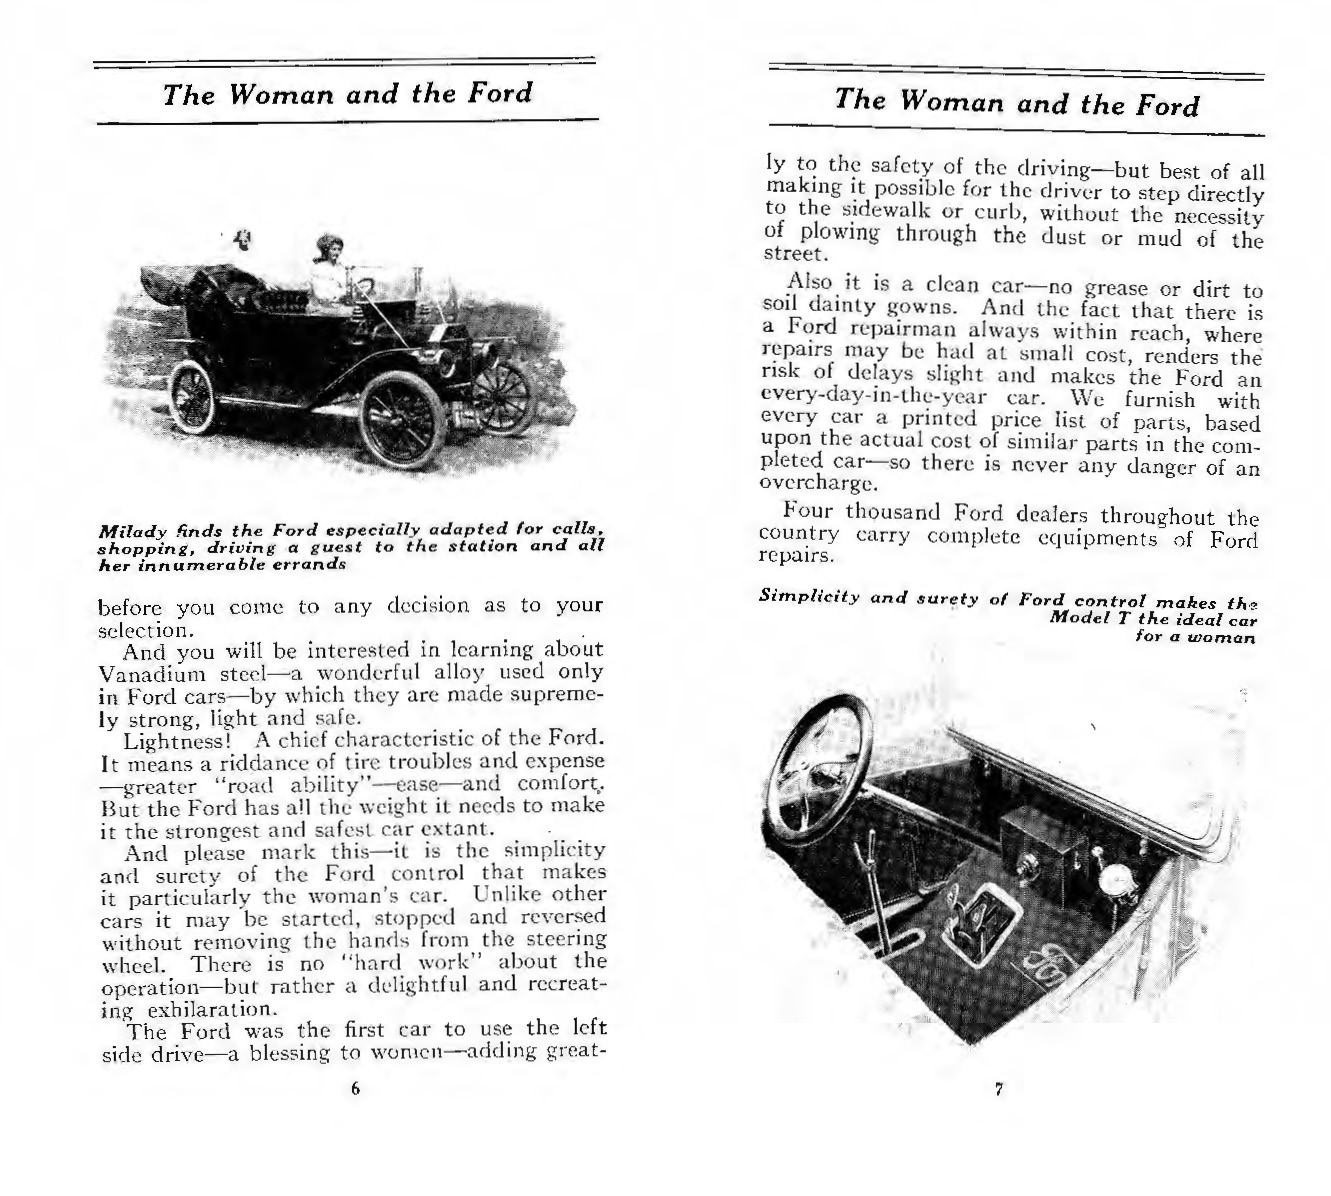 n_1912 The Woman & the Ford-06-07.jpg